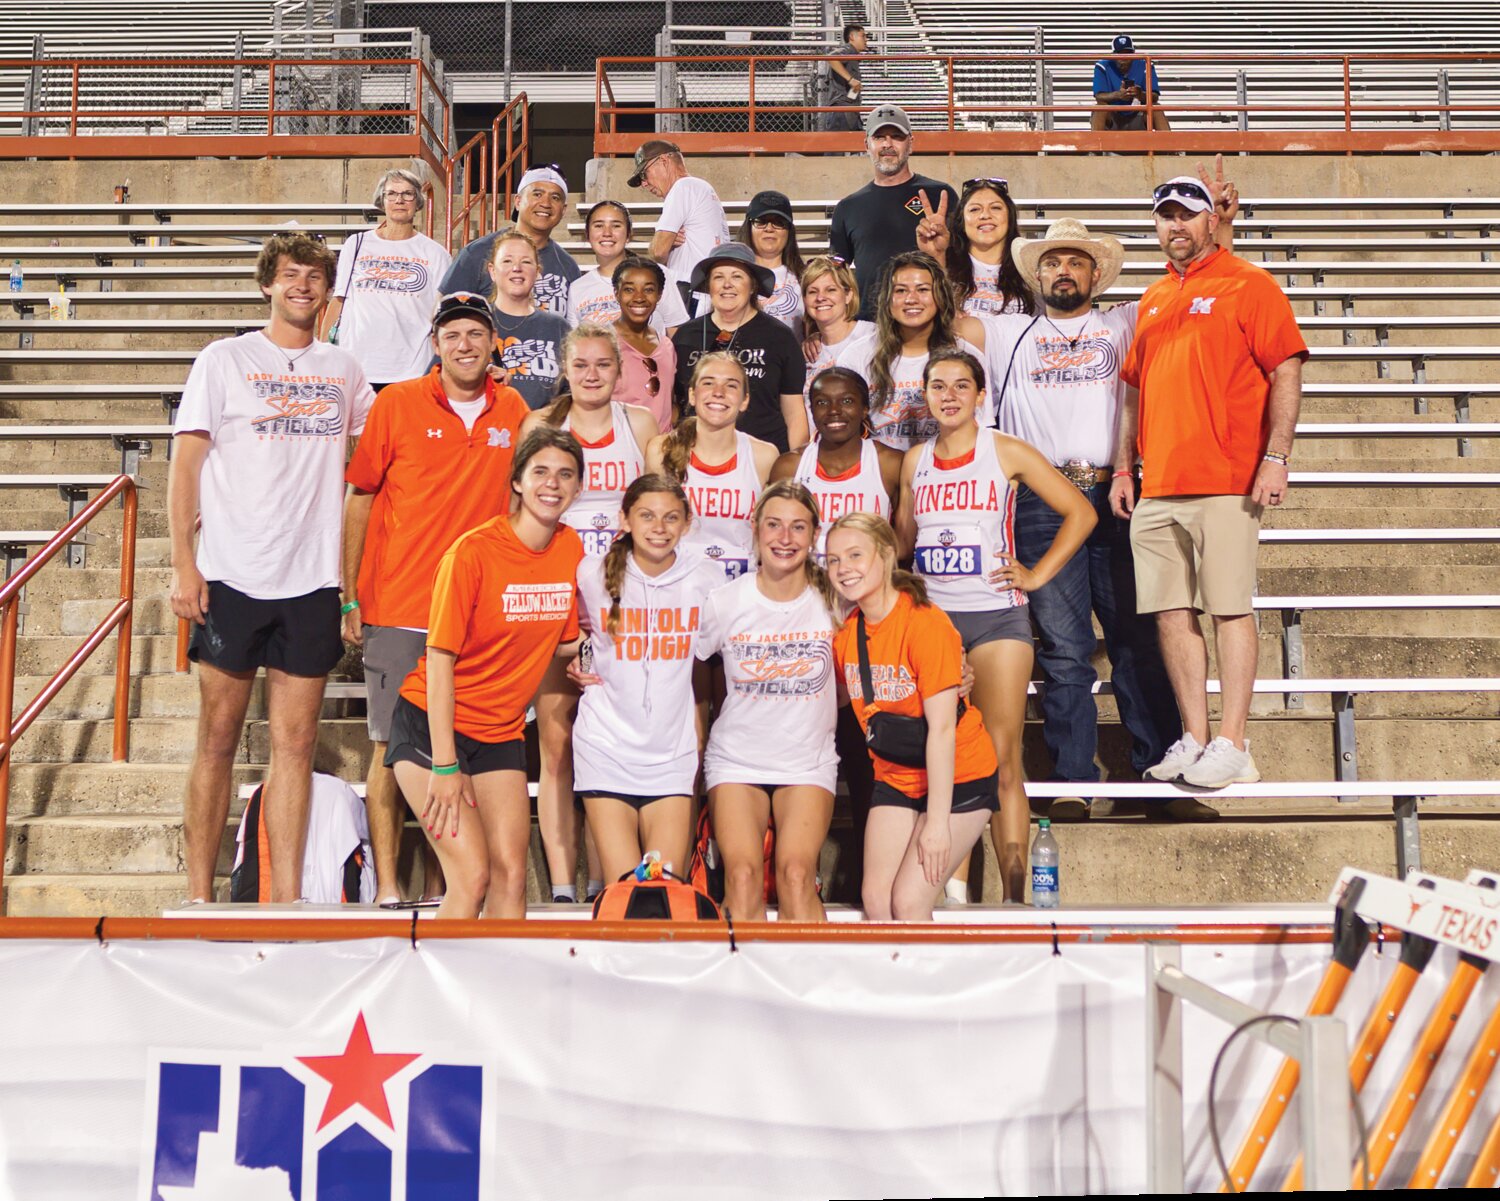 Friends and family gathered at the state track meet last Thursday night to cheer on the Mineola Lady Jacket 1600-meter relay team. [view more relay running]